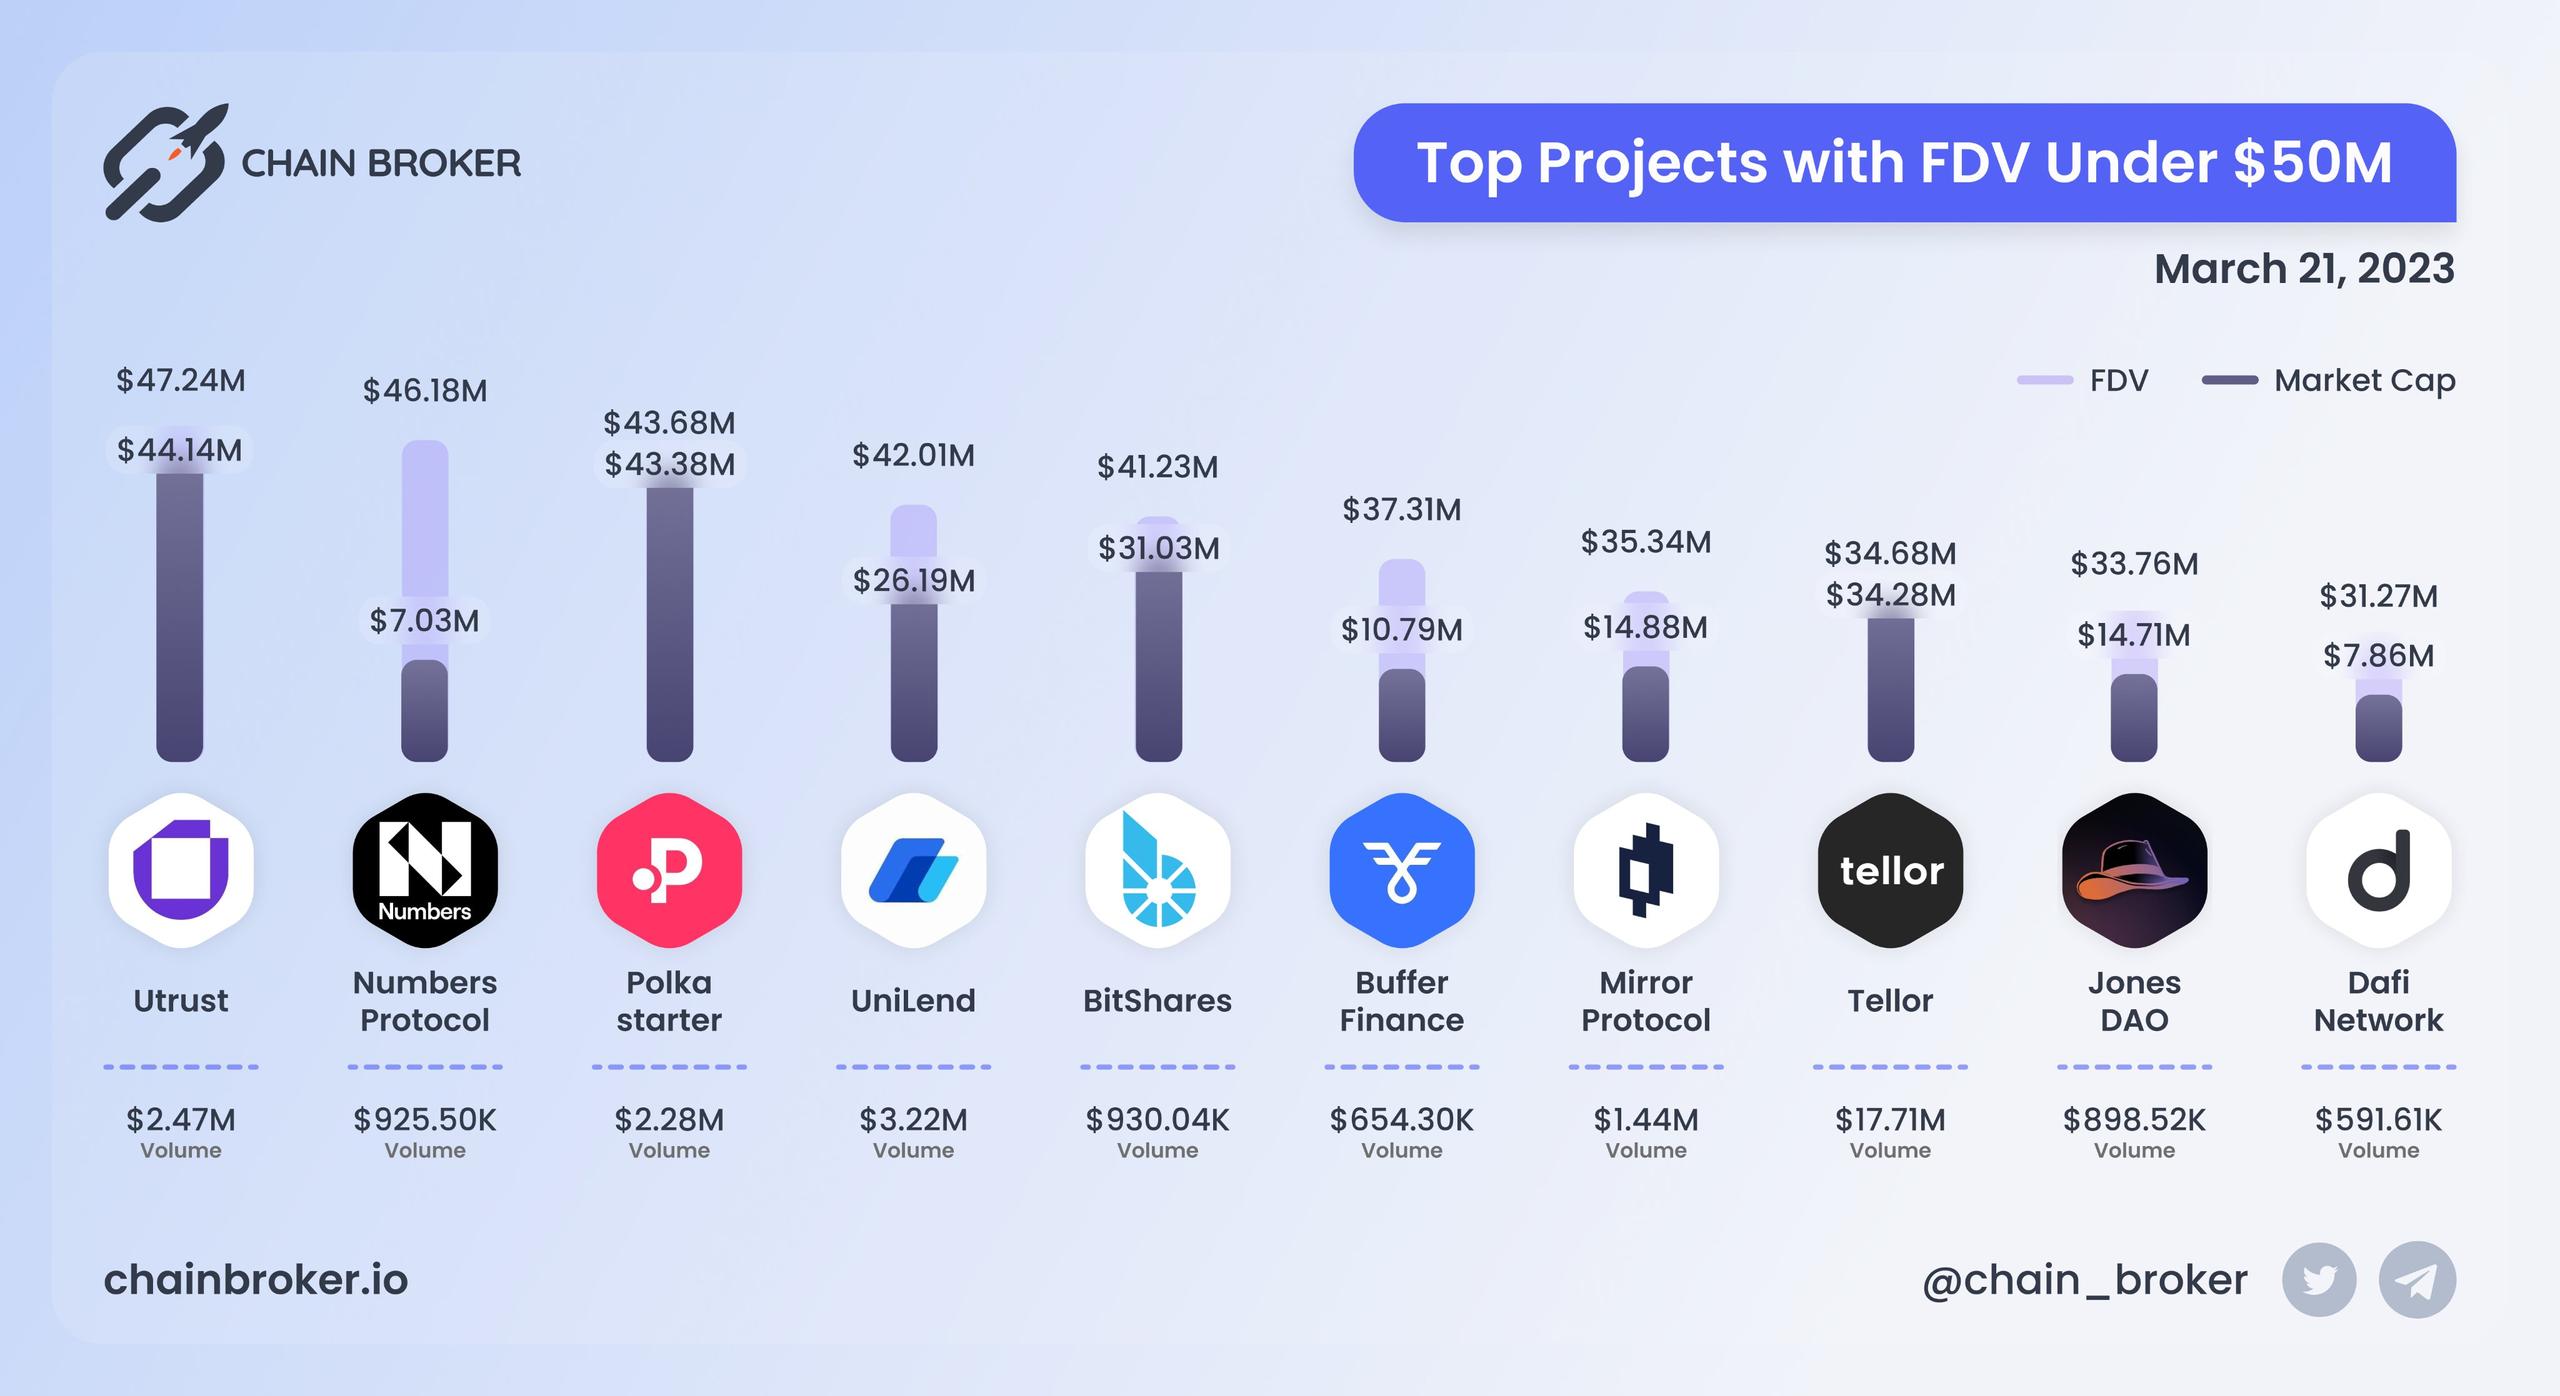 Top projects with FDV under $50M